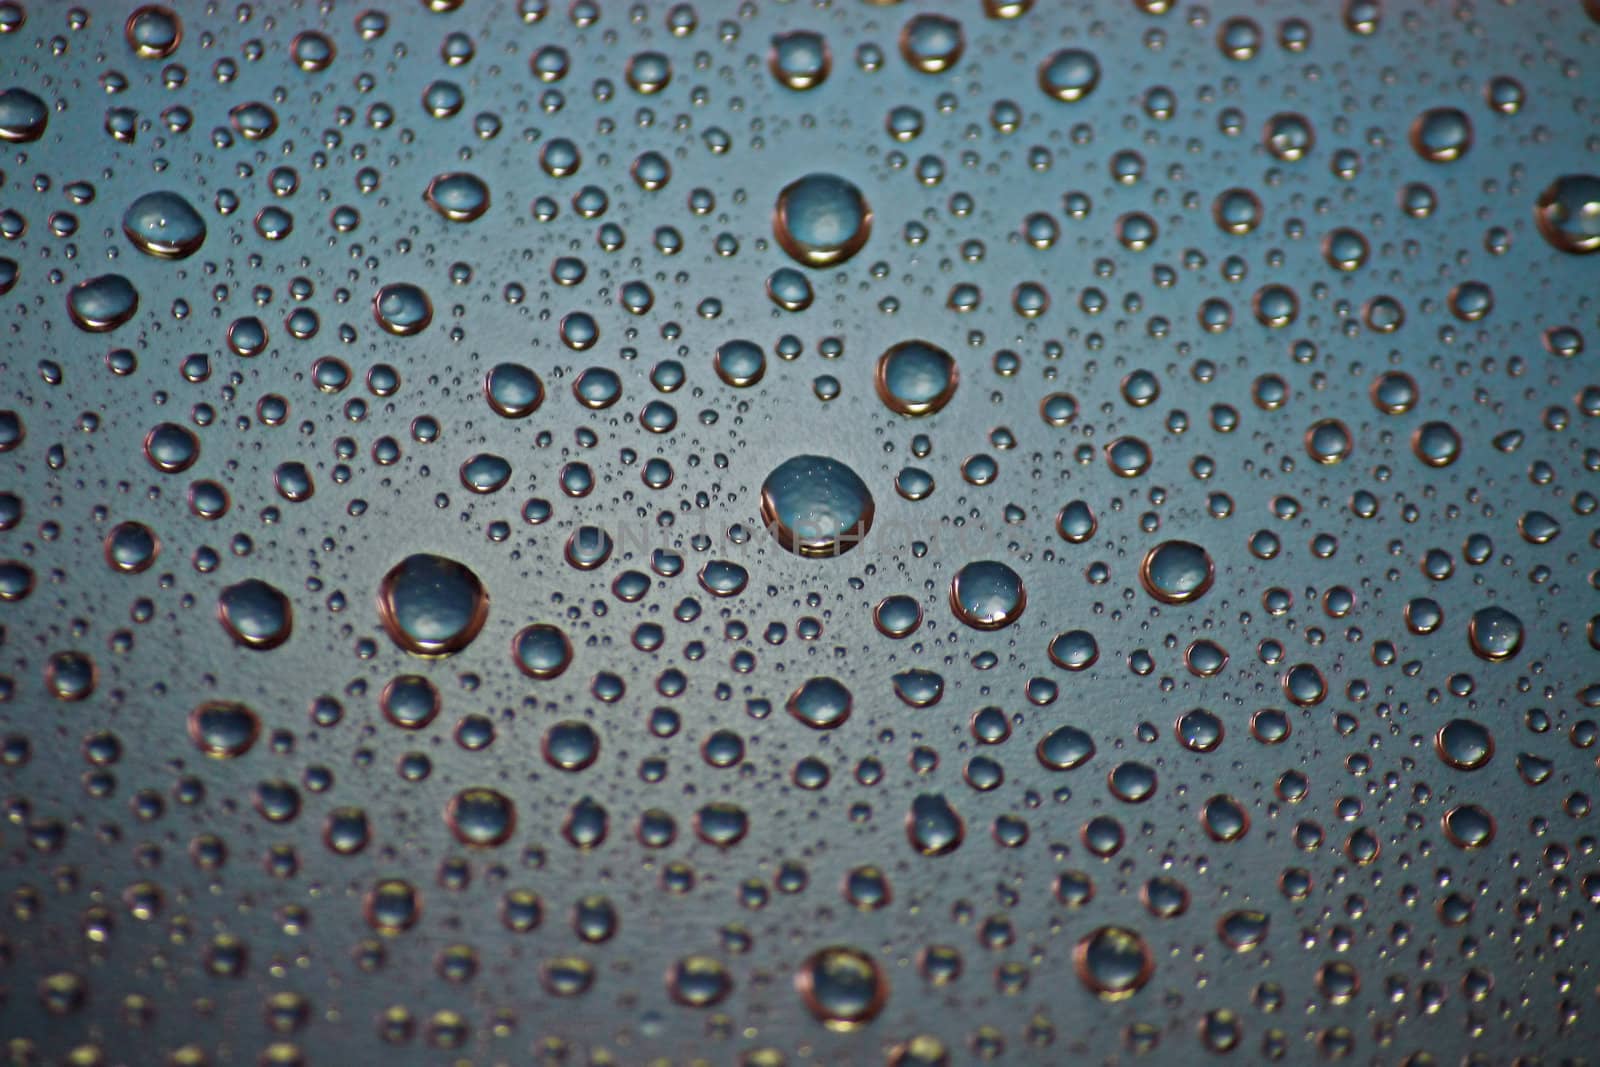 We see an unusual background. These are multi-coloured drops of water on a surface.